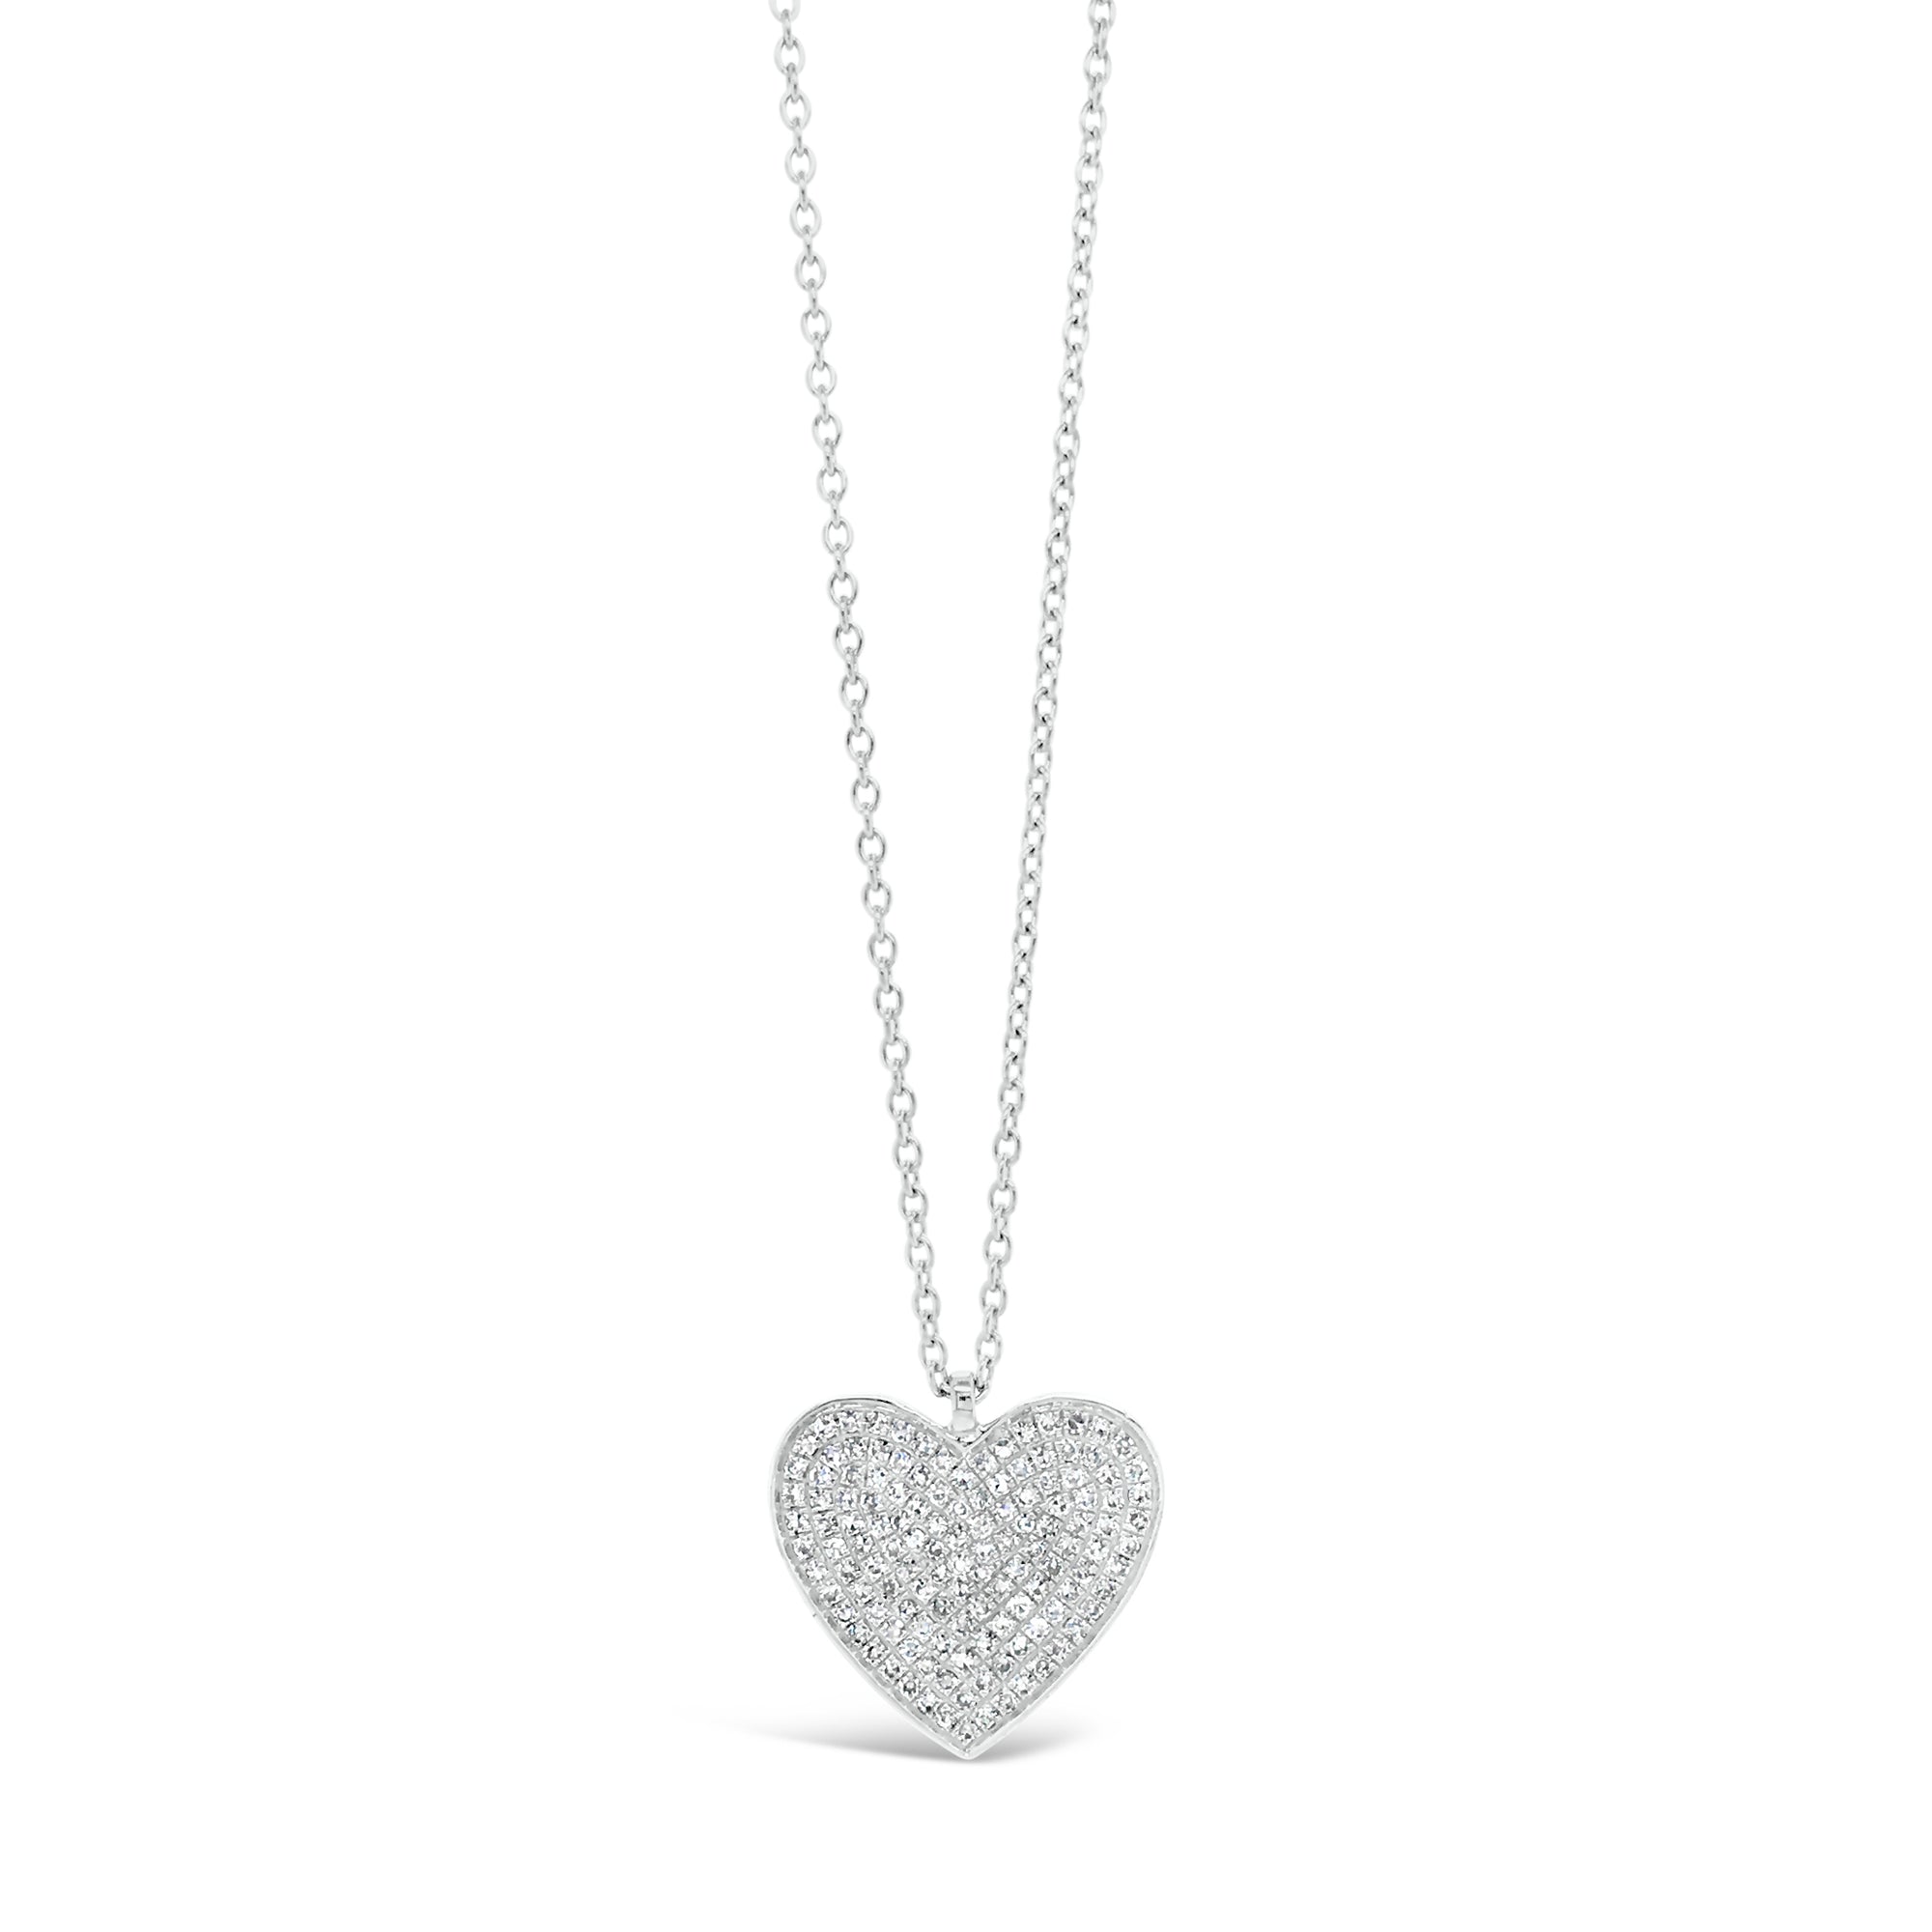 Diamond Classic Heart Pendant Necklace  - 14K gold weighing 2.72 grams.  - 130 round diamonds totaling 0.41 carats.